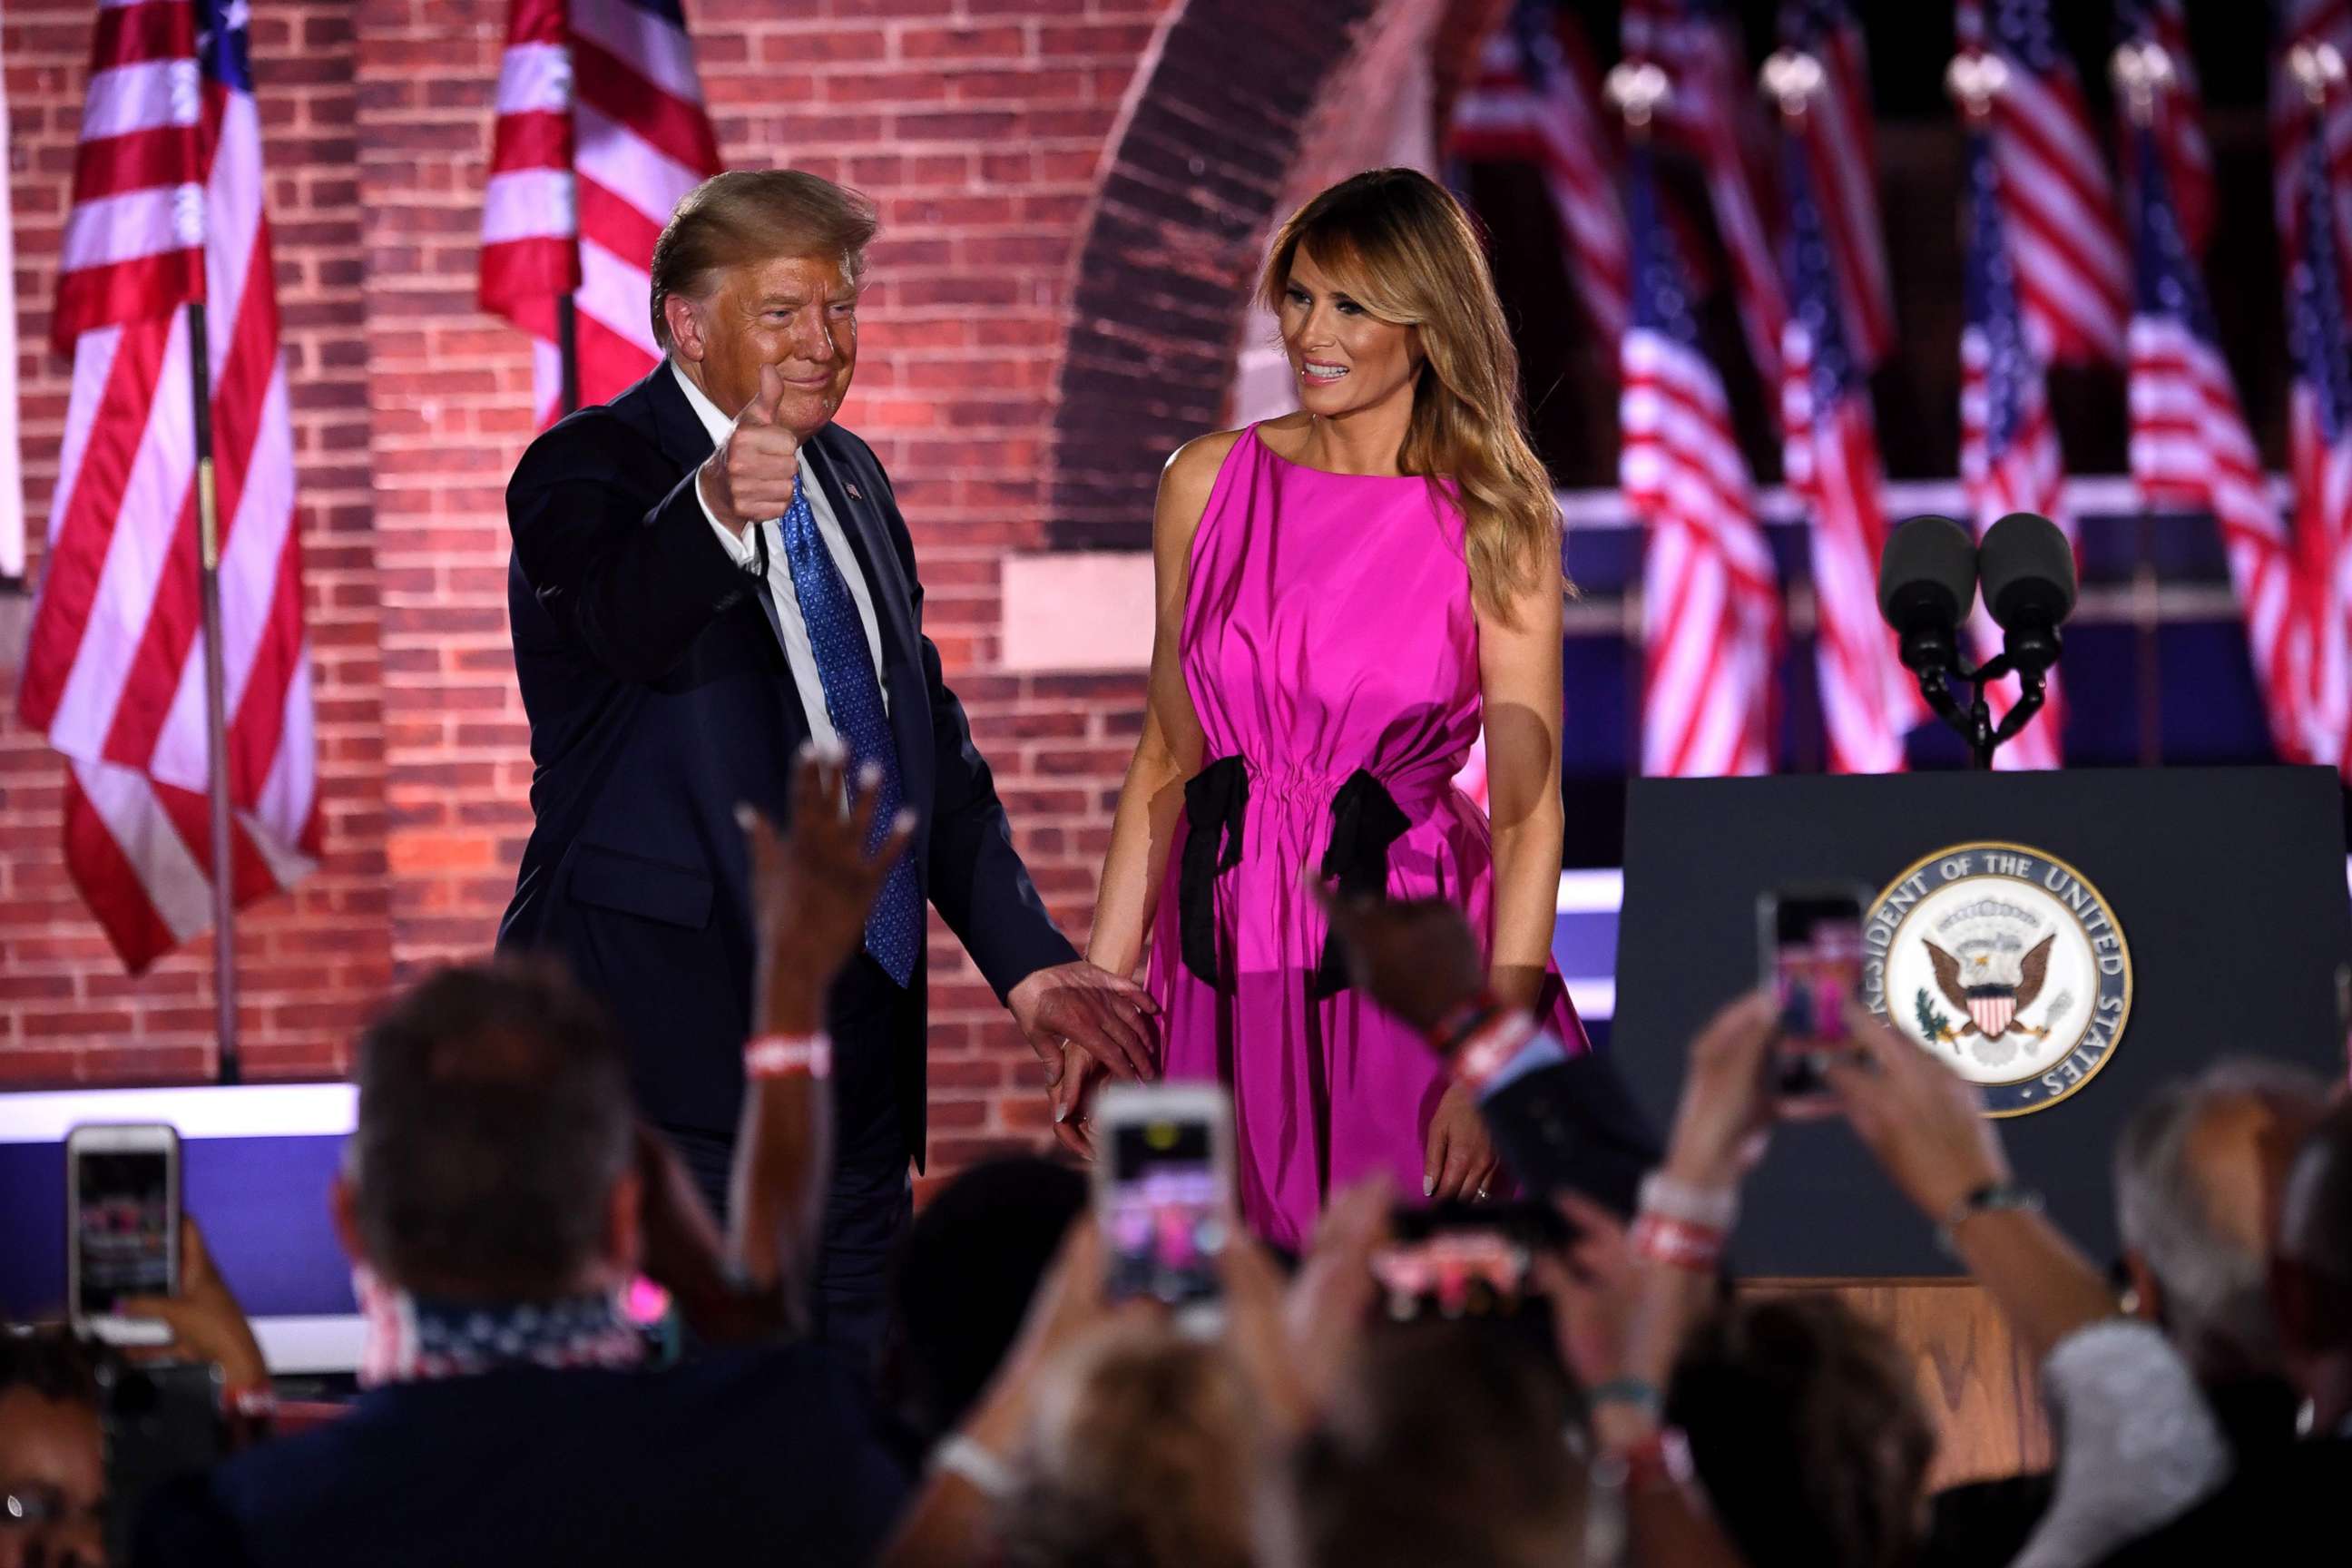 PHOTO: First lady Melania Trump and President Donald Trump greet to attendees during the third night of the Republican National Convention at Fort McHenry National Monument in Baltimore, Aug. 26, 2020.